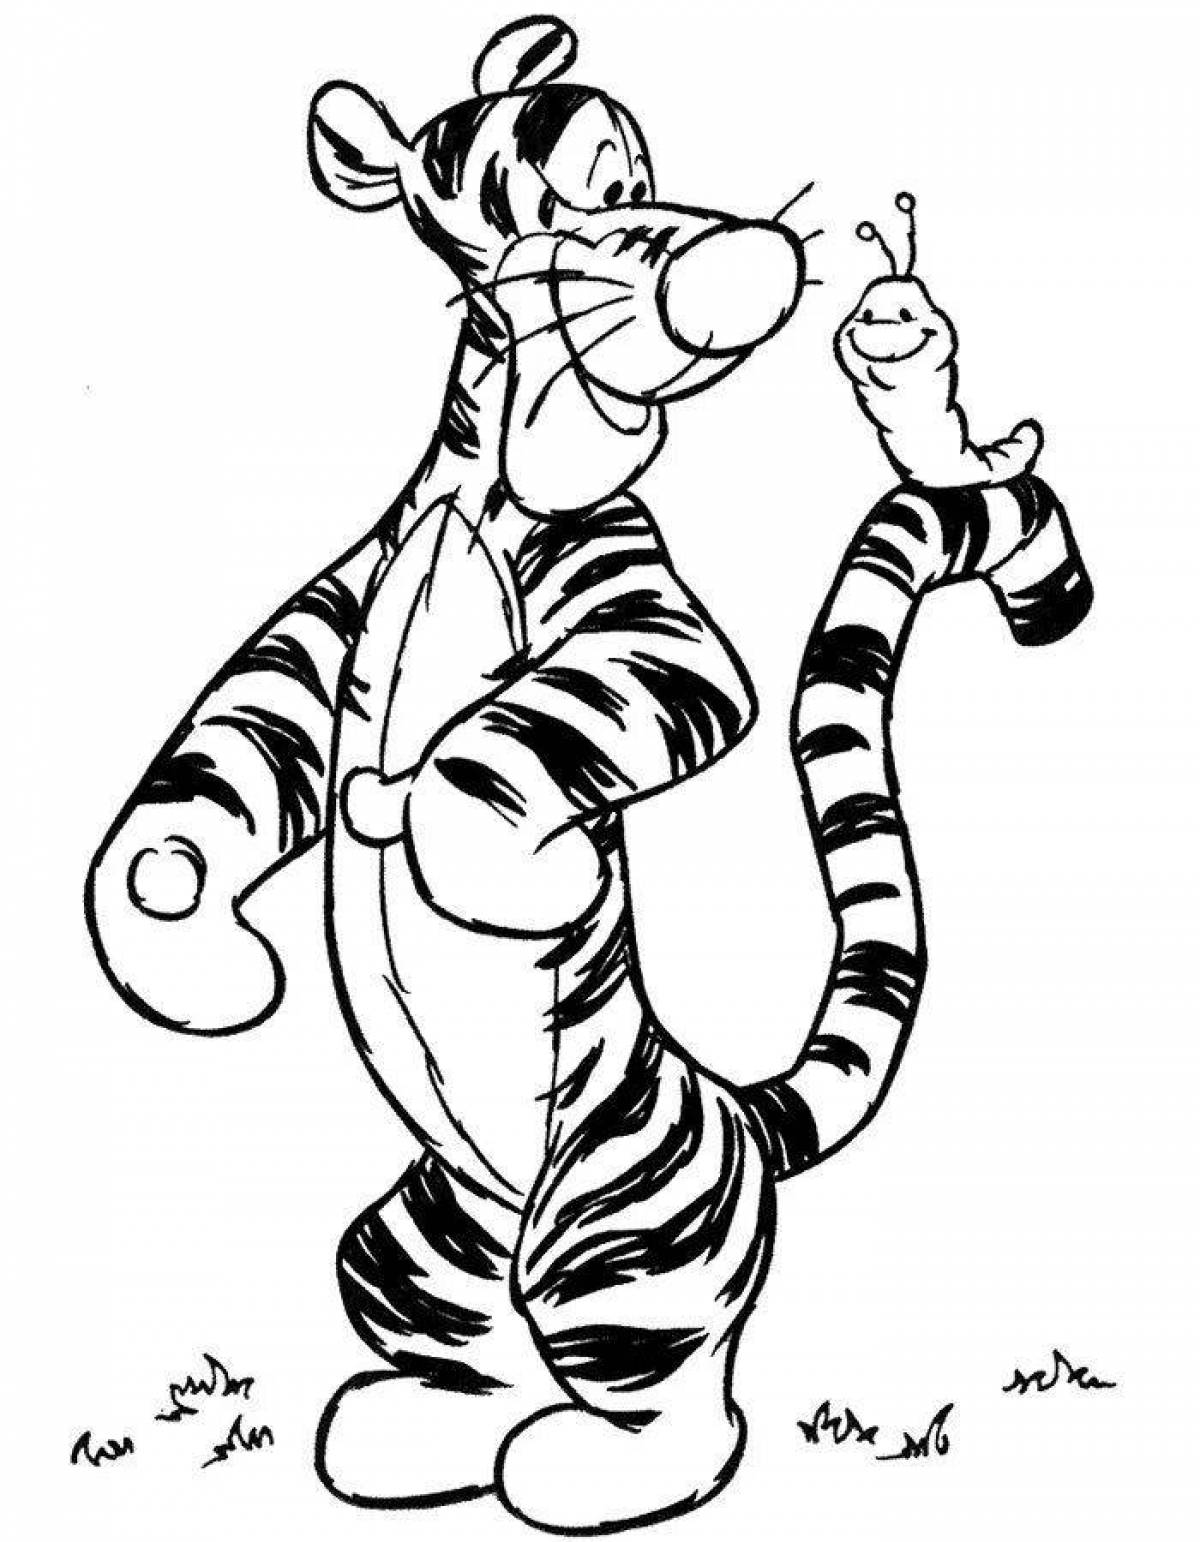 Glorious tiger coloring page